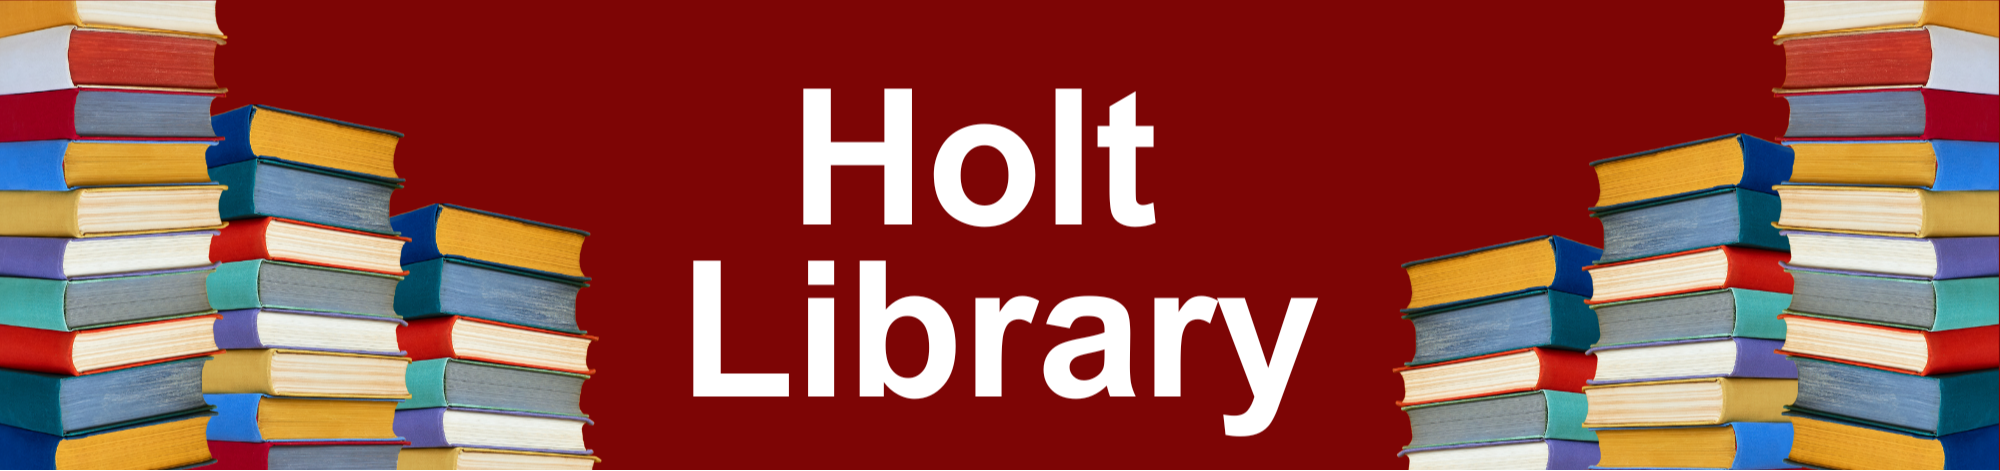 Holt library